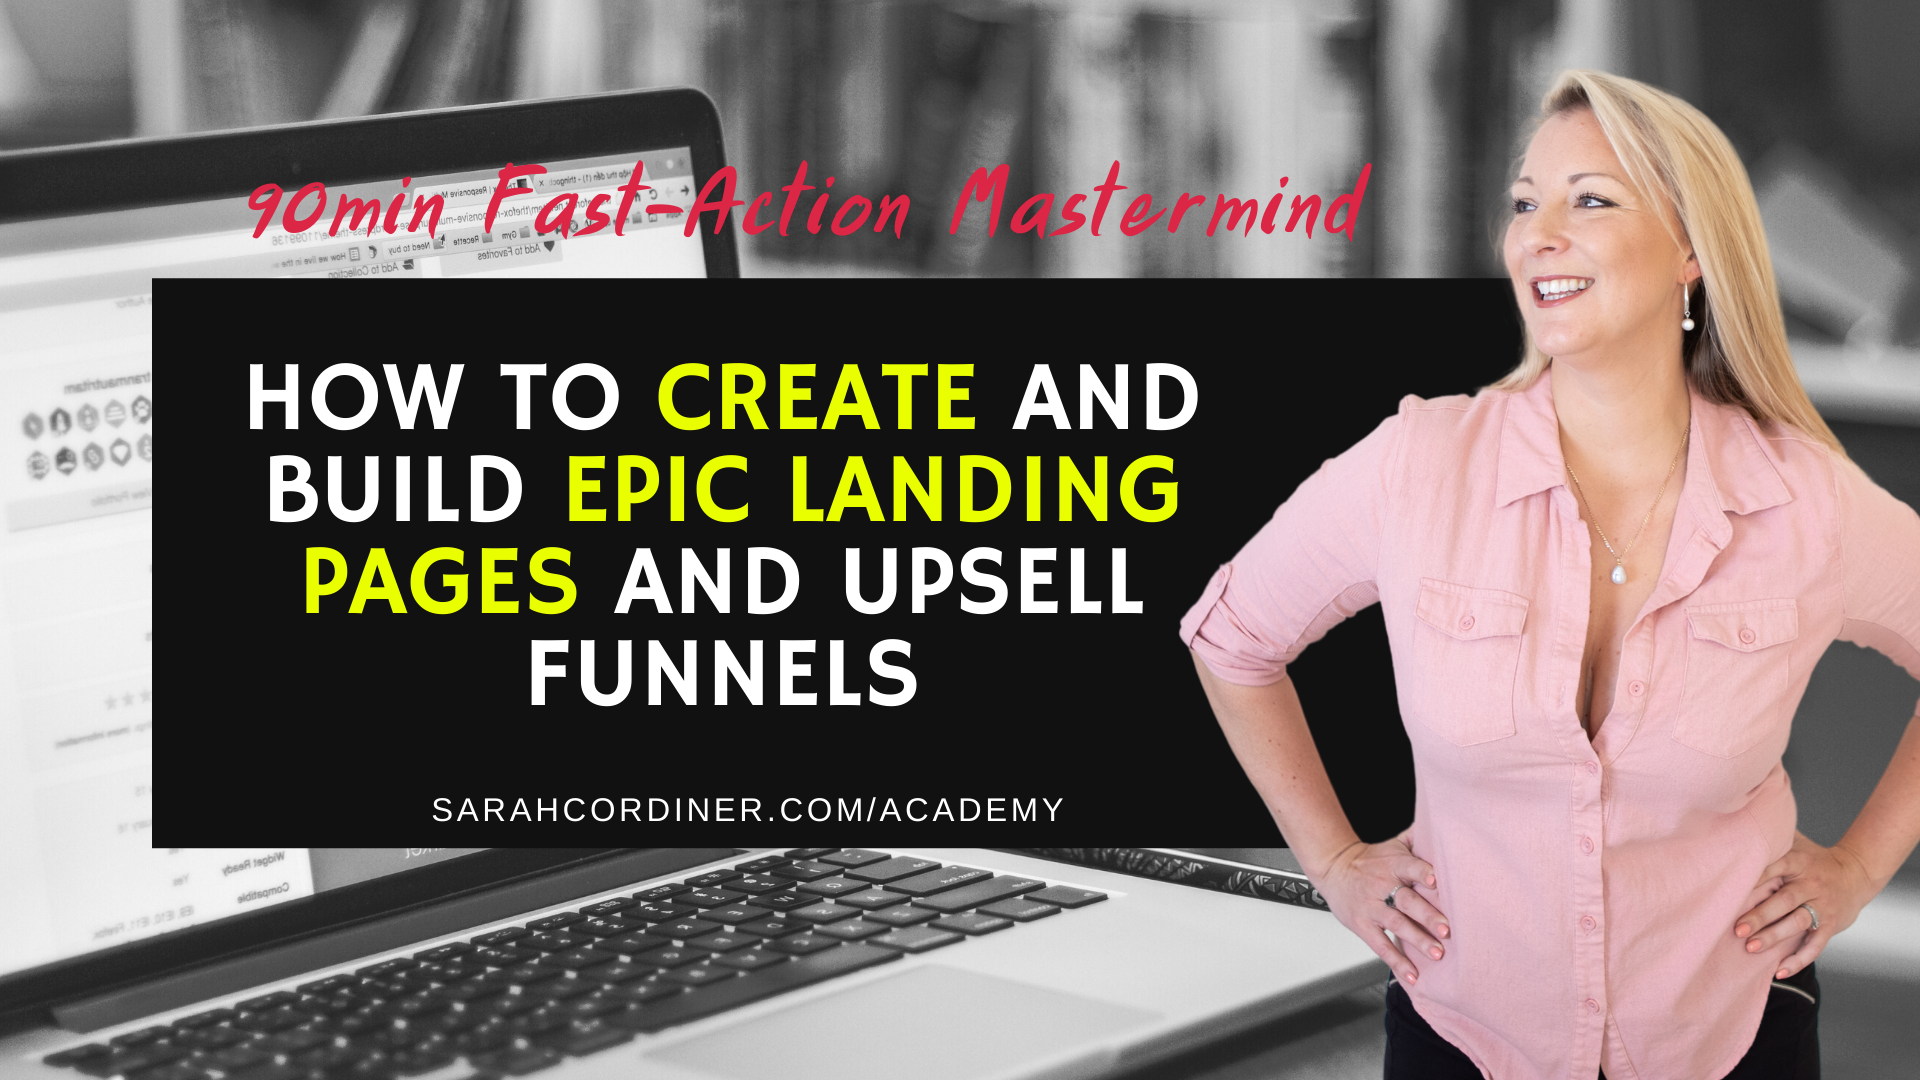 April - Mastermind Call How To Create and Build Epic Landing Pages and Upsell Funnels